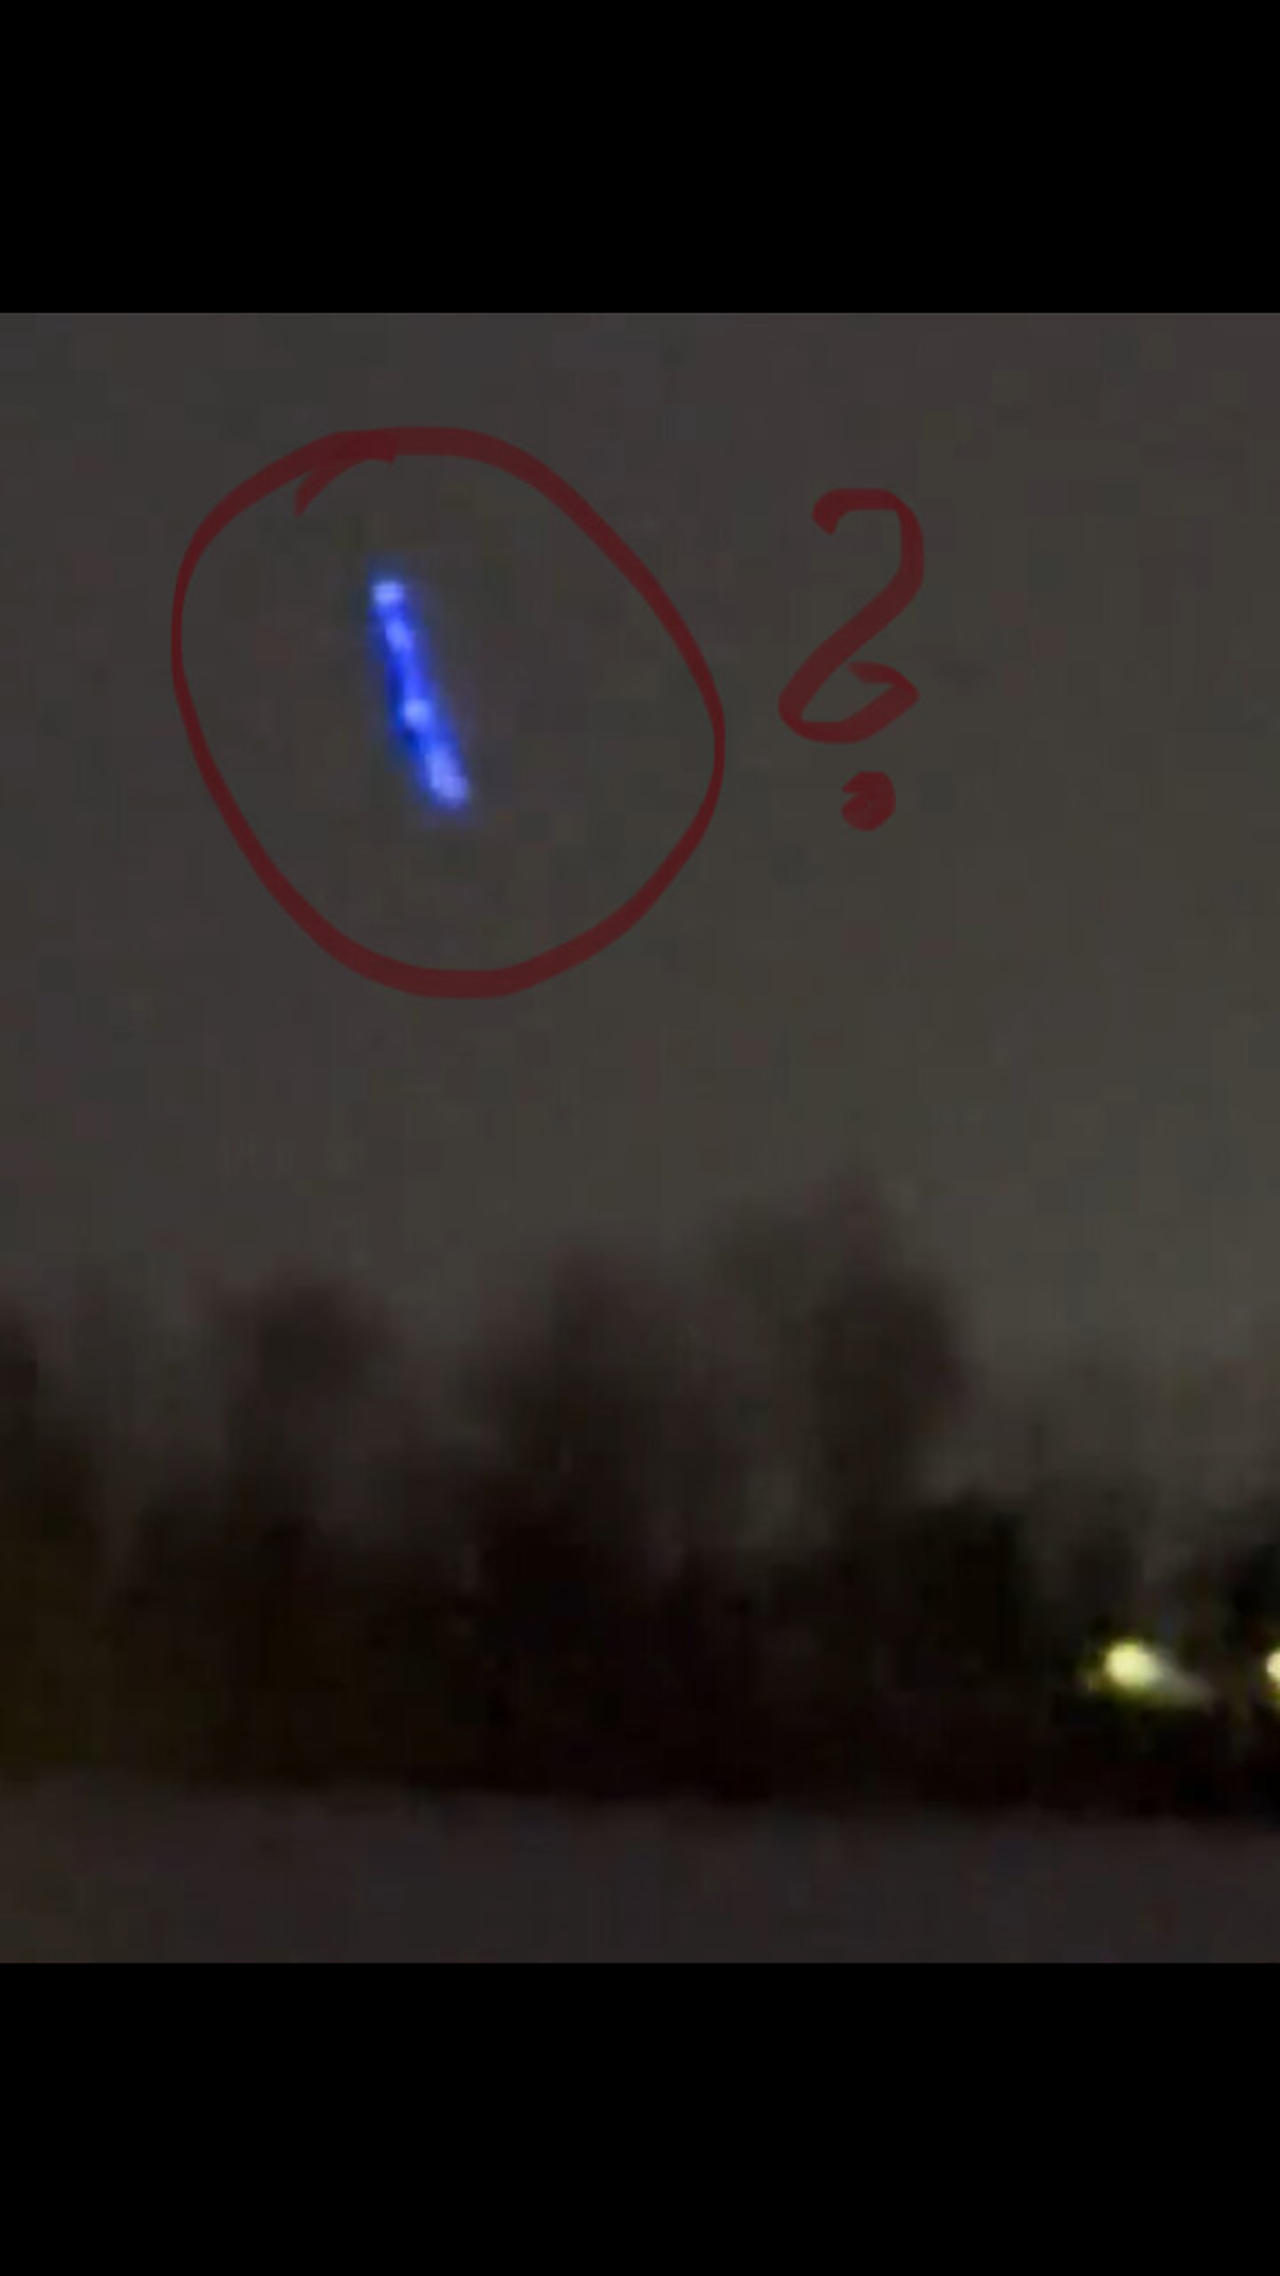 BREAKING: A video captures an unidentified object slowly descending into the Delaware River